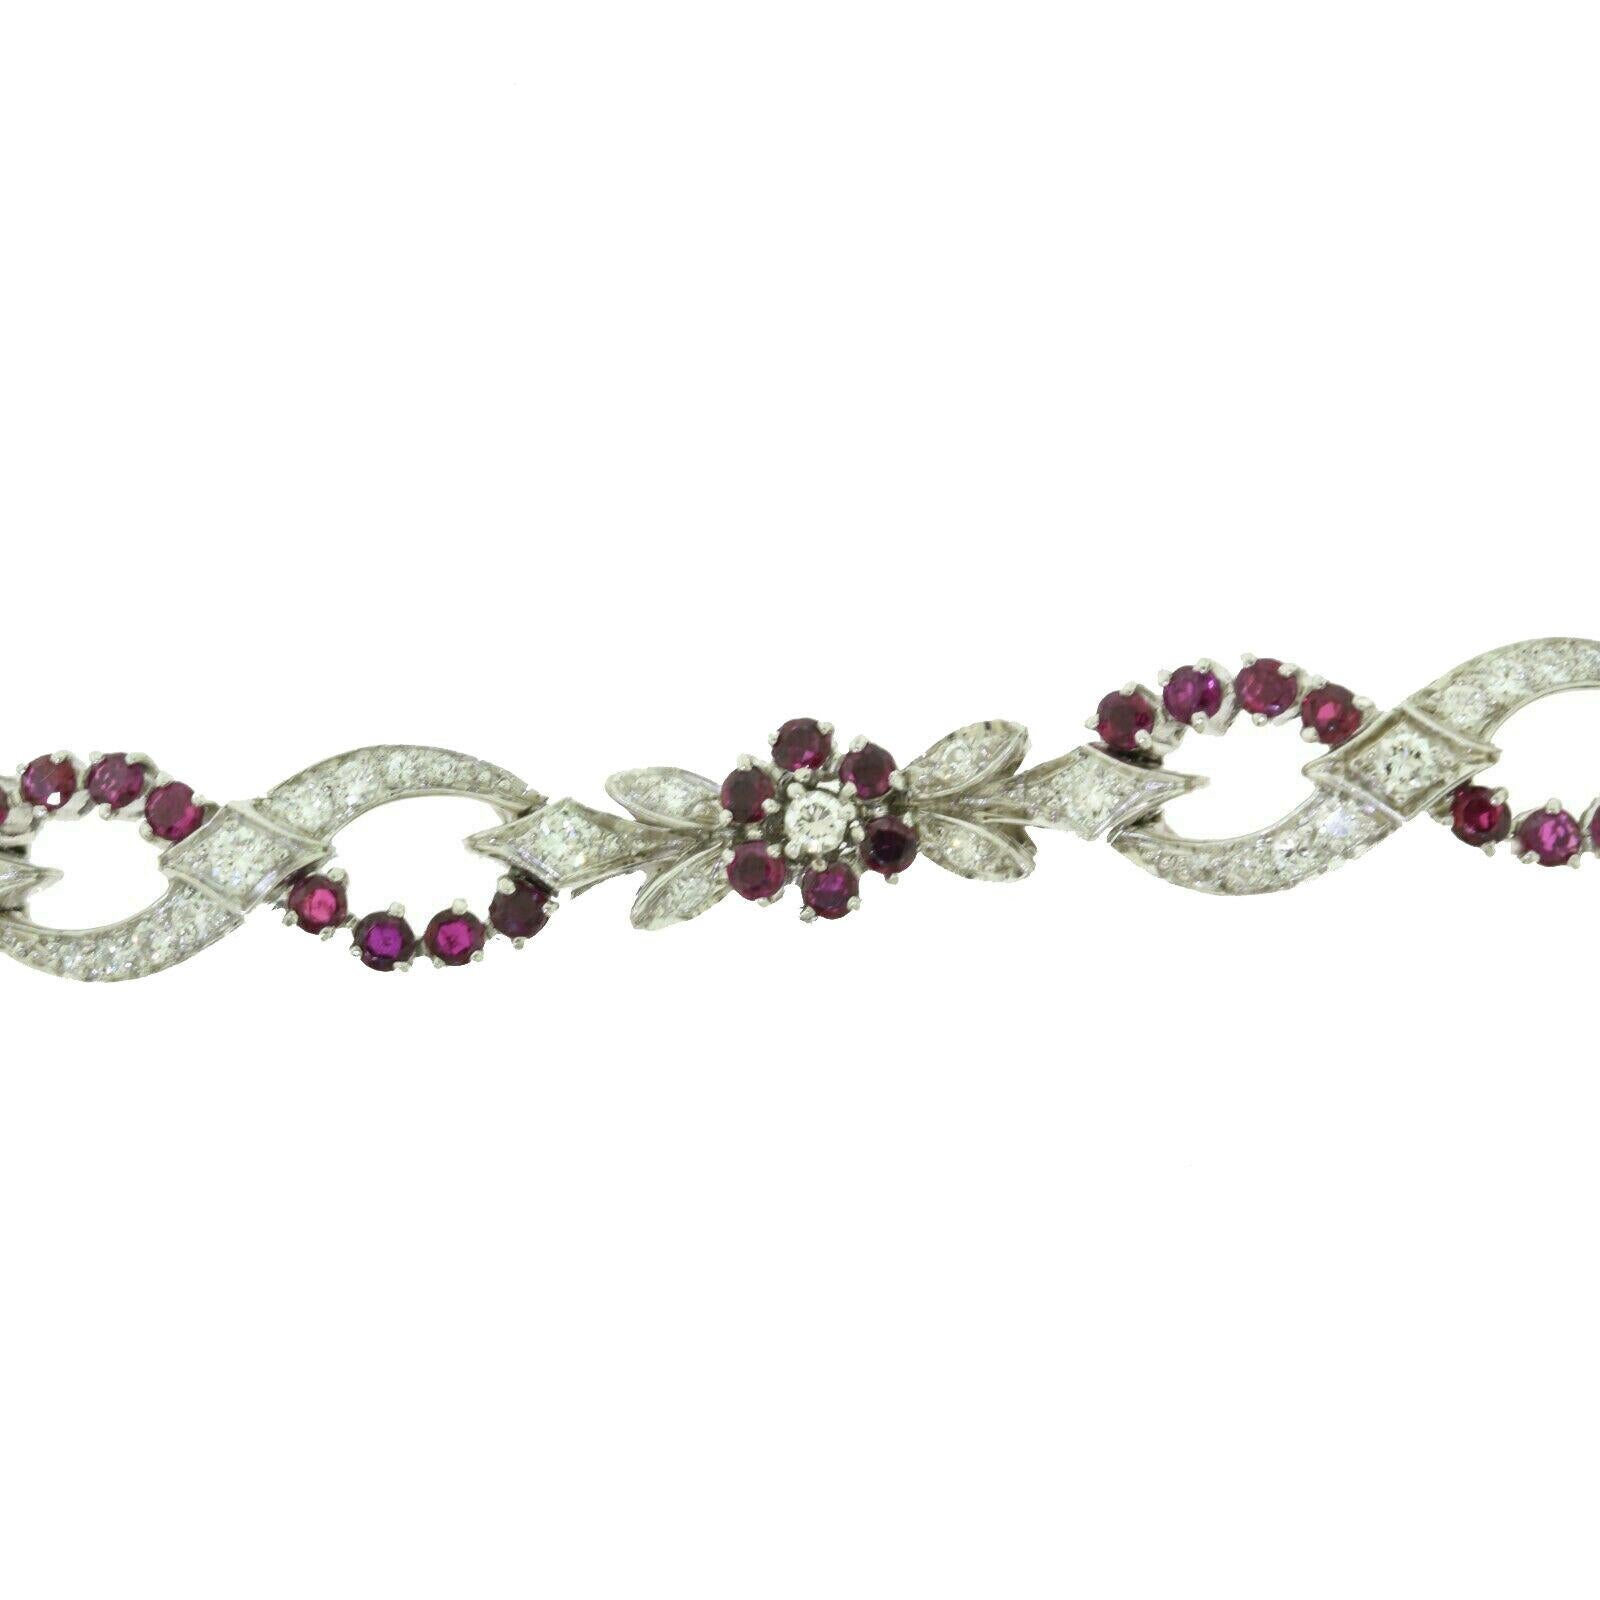 Brilliance Jewels, Miami
Questions? Call Us Anytime!
786,482,8100

Designer: Tiffany & Co.

Style: Diamond and Ruby Floral Bracelet

Metal: Platinum 950

Stones: 36 Round Rubies, 46 Round Brilliant Cut Diamonds

Bracelet Length: 7